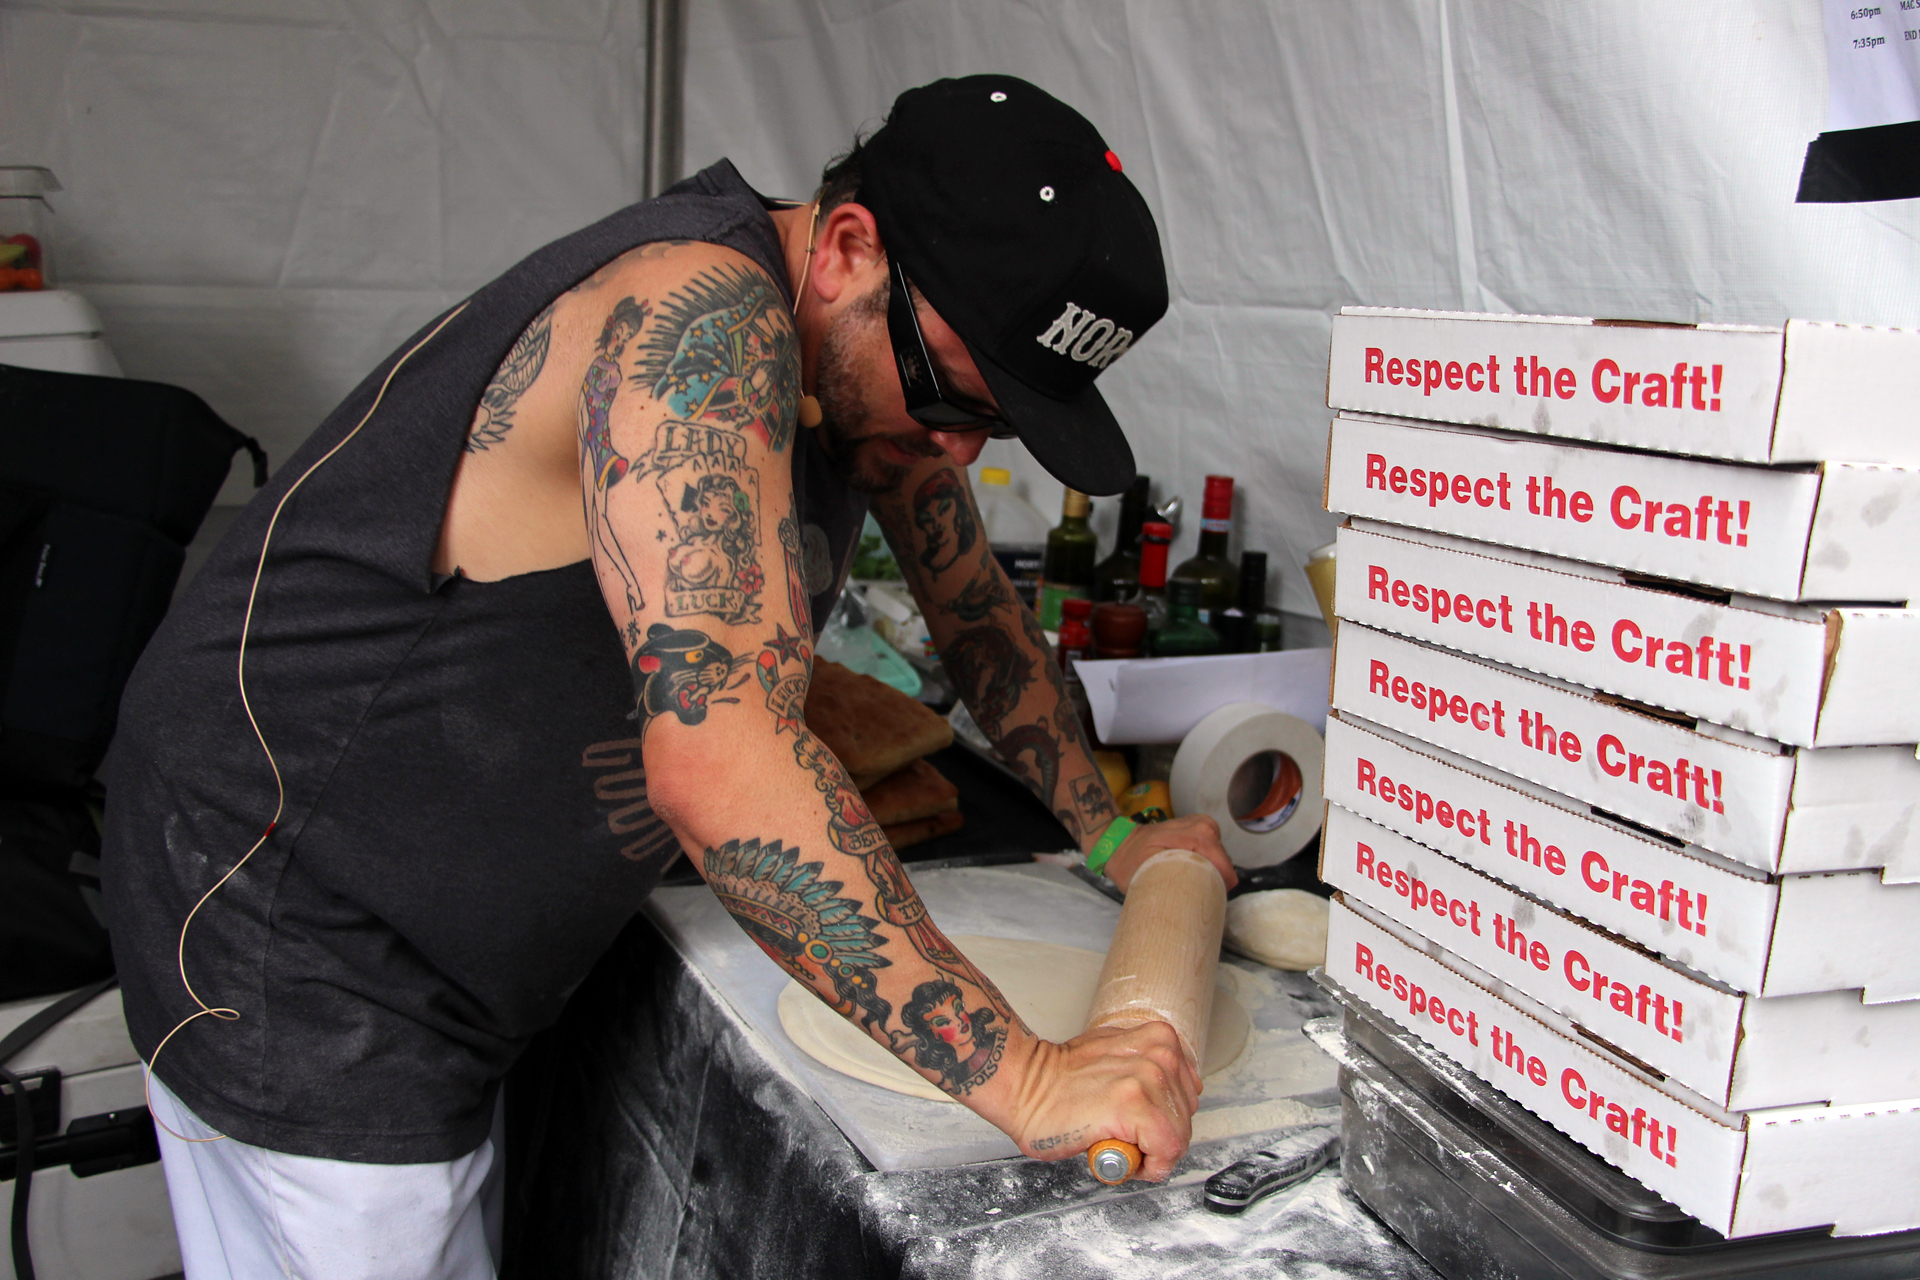 Tony Gemignani rolling and prepping the dough for his pizza performance.